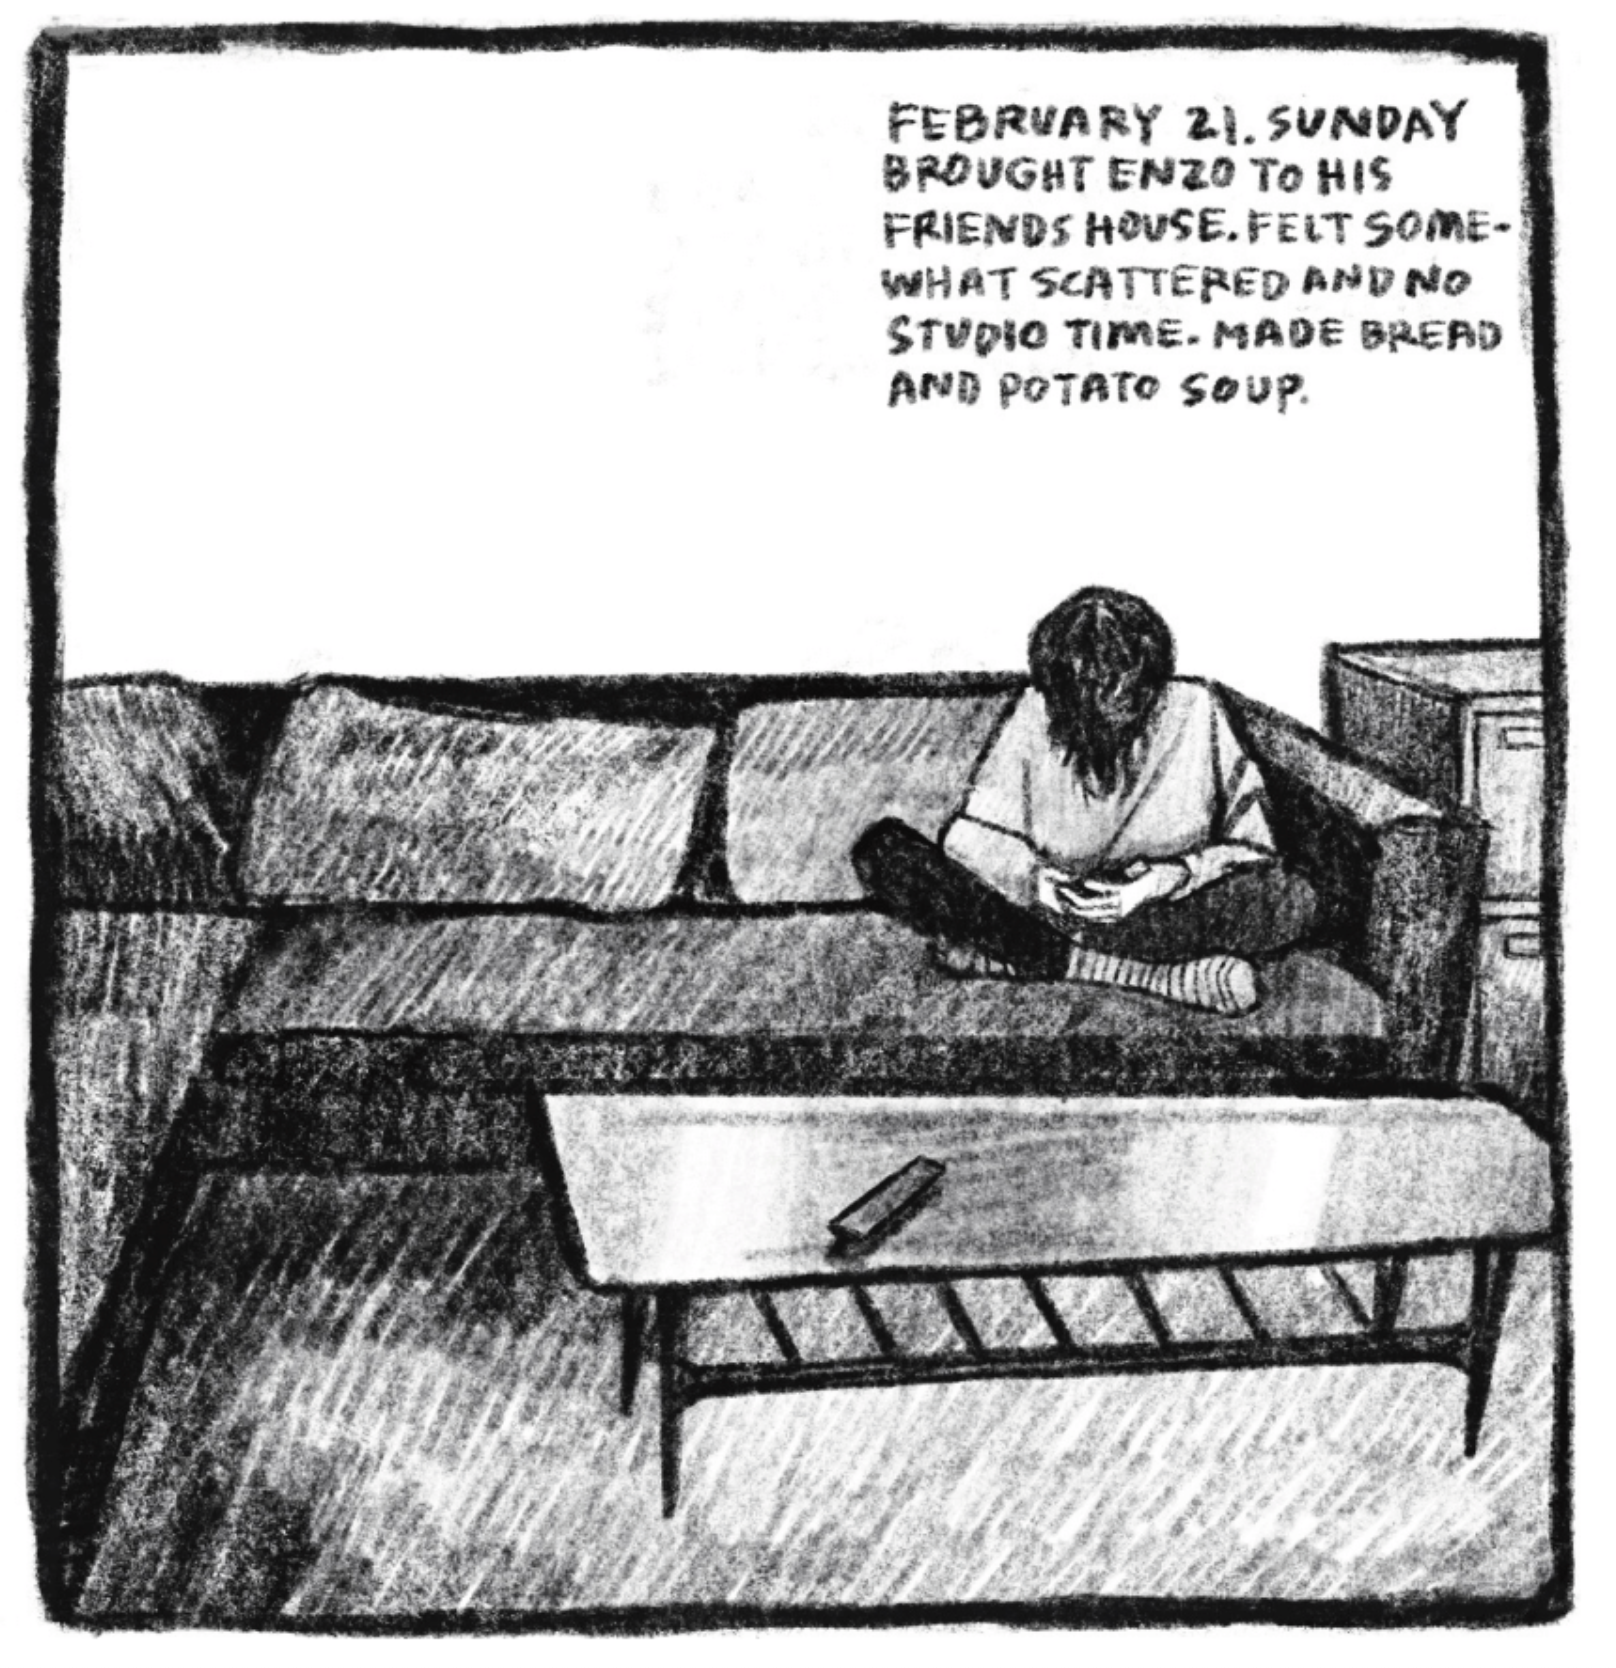 Hold Still Episode 9, Panel 5
Upper right corner reads: "FEBRUARY 21. SUNDAY BROUGHT ENZO TO HIS FRIENDS HOUSE. FELT SOMEWHAT SCATTERED AND NO STUDIO TIME. MADE BREAD AND POTATO SOUP."
Drawing of a young person sitting cross legged on the couch, looking down.